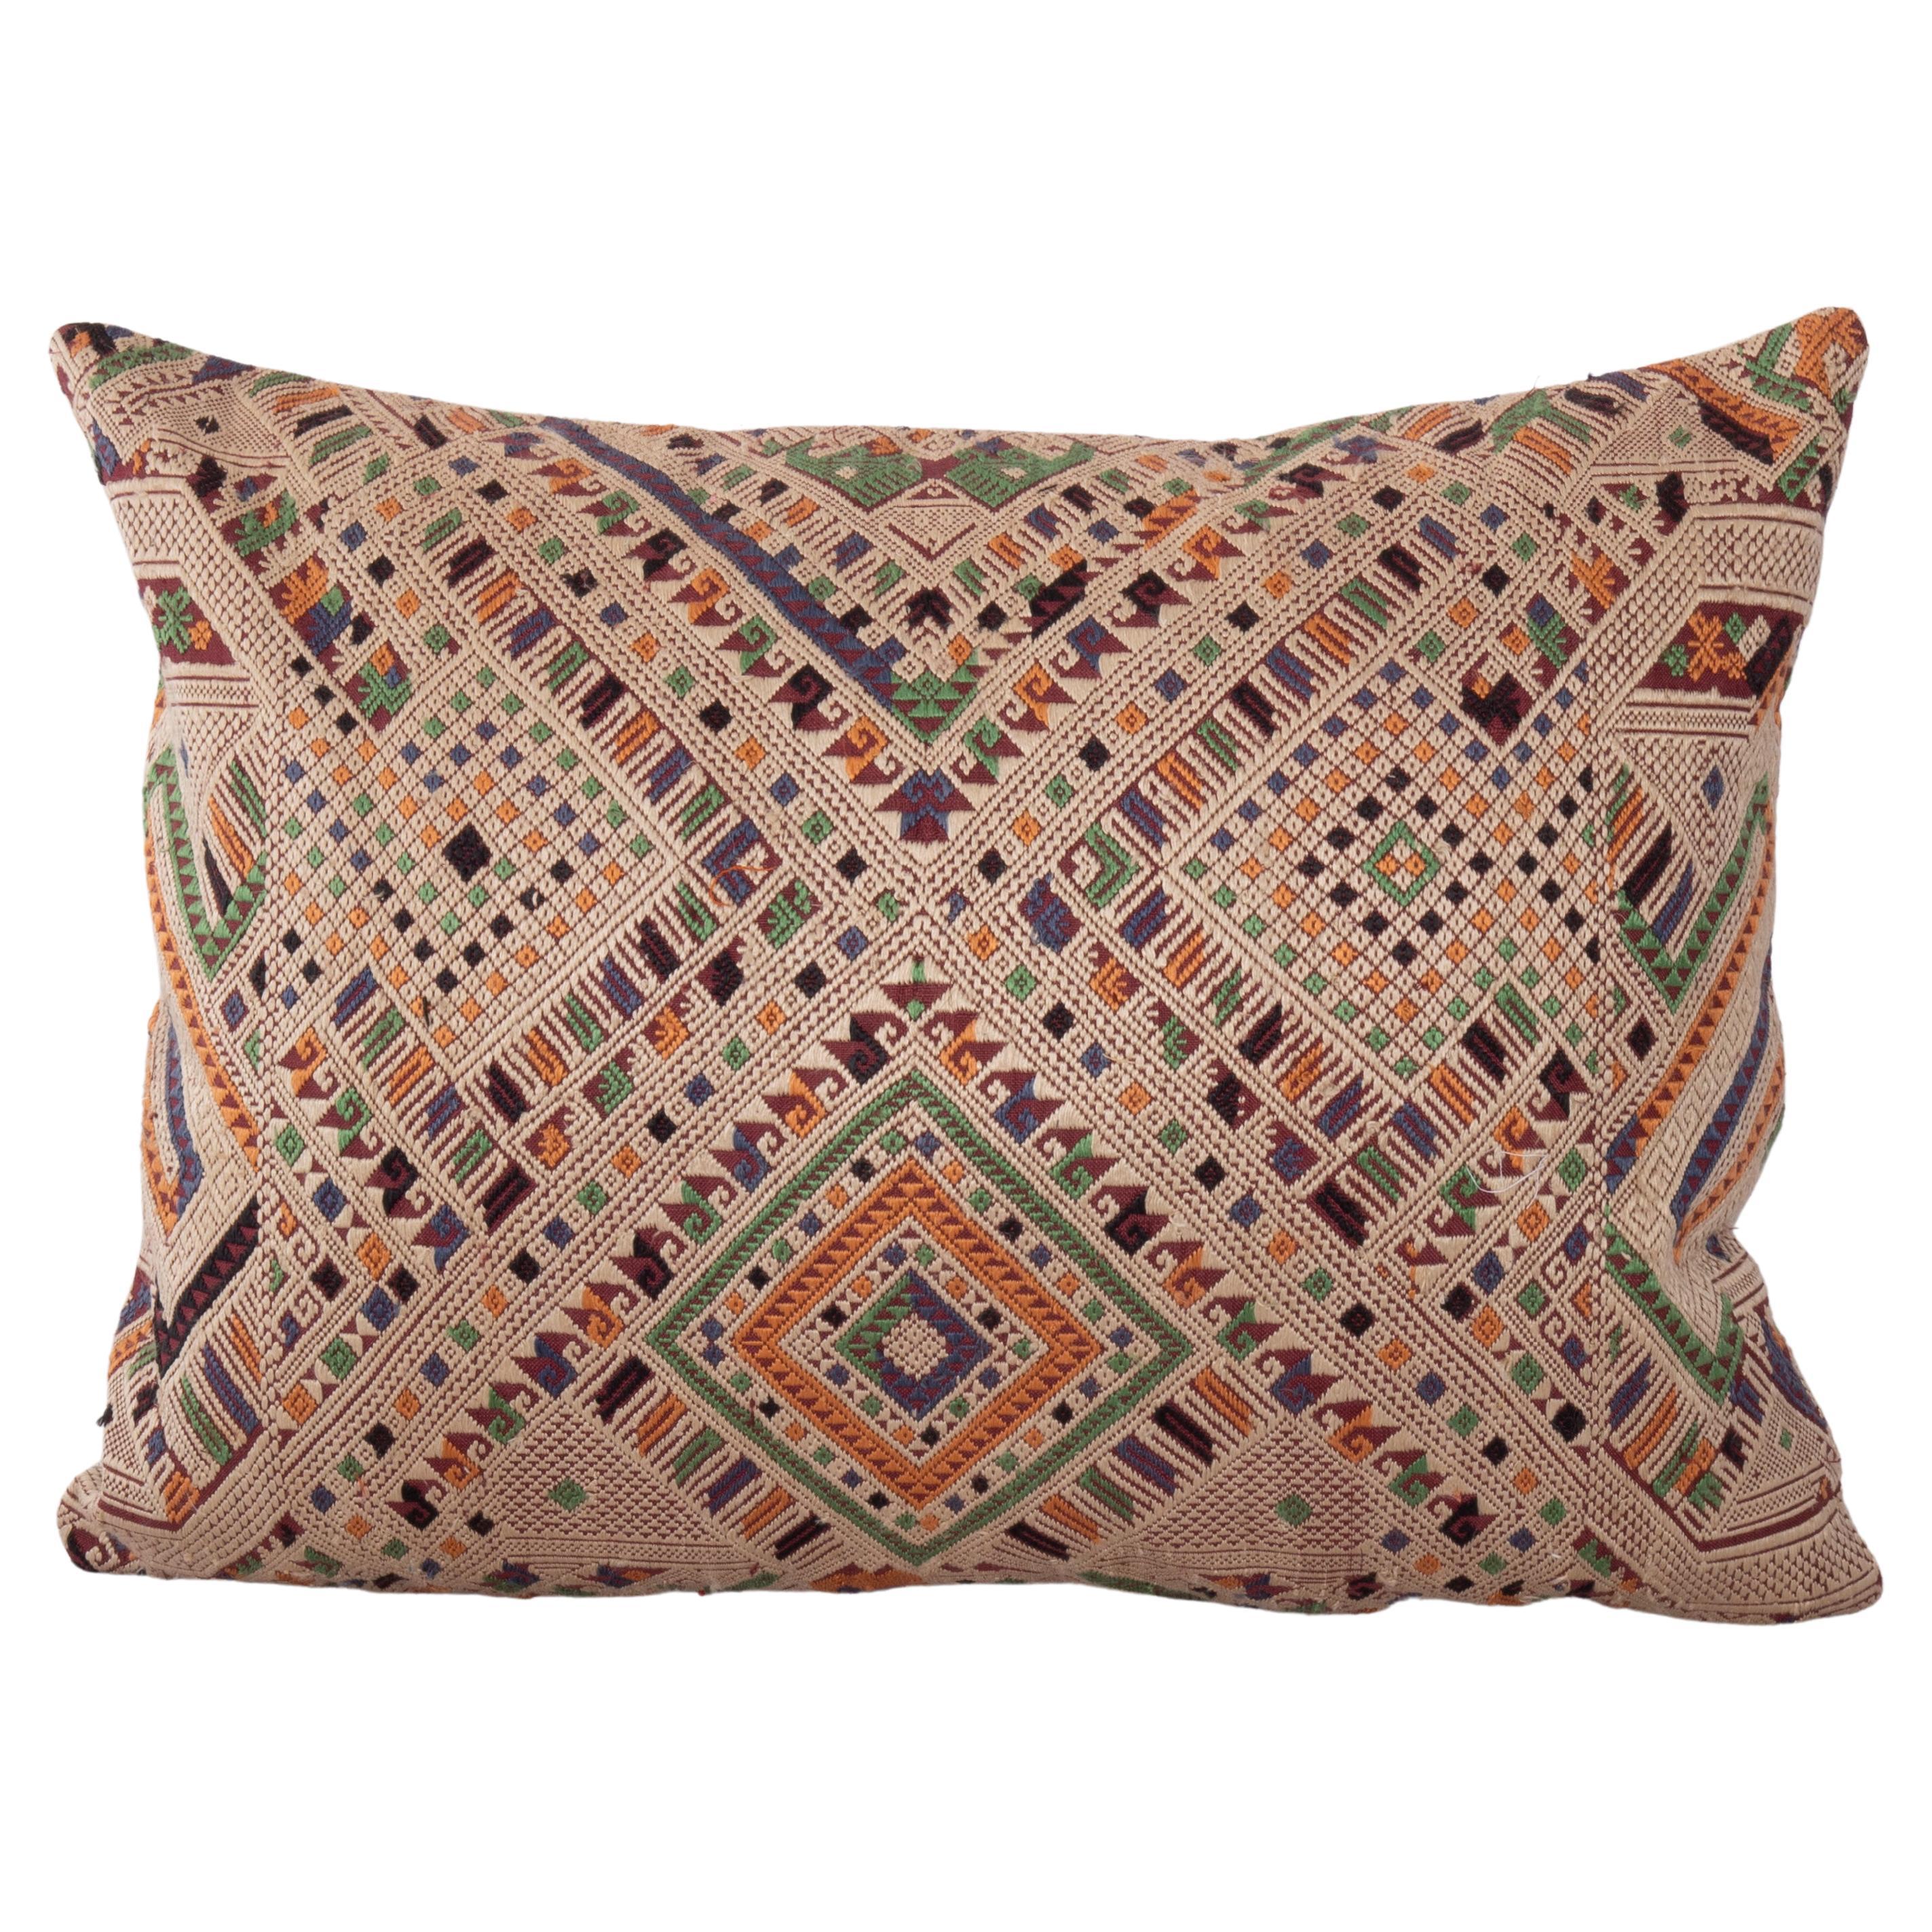 Pillow Cover Made from a Laotian Vintage Silk Embroidery